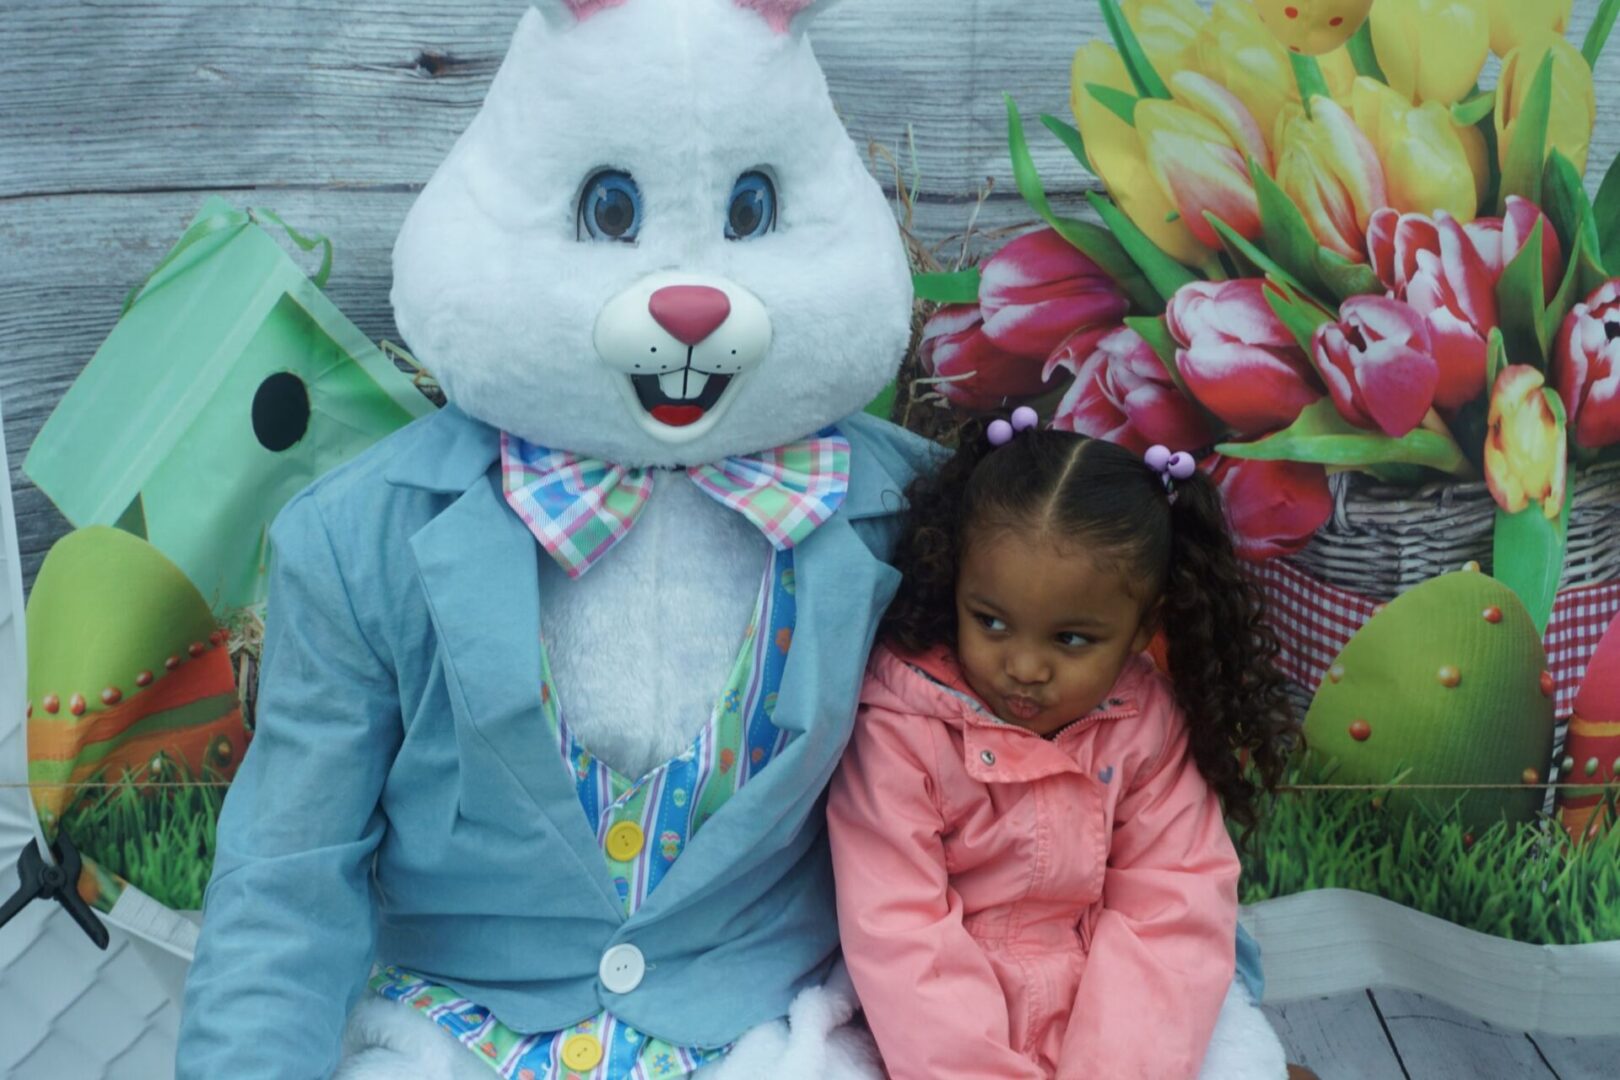 The bunny mascot and a girl in pig tails and pink coat